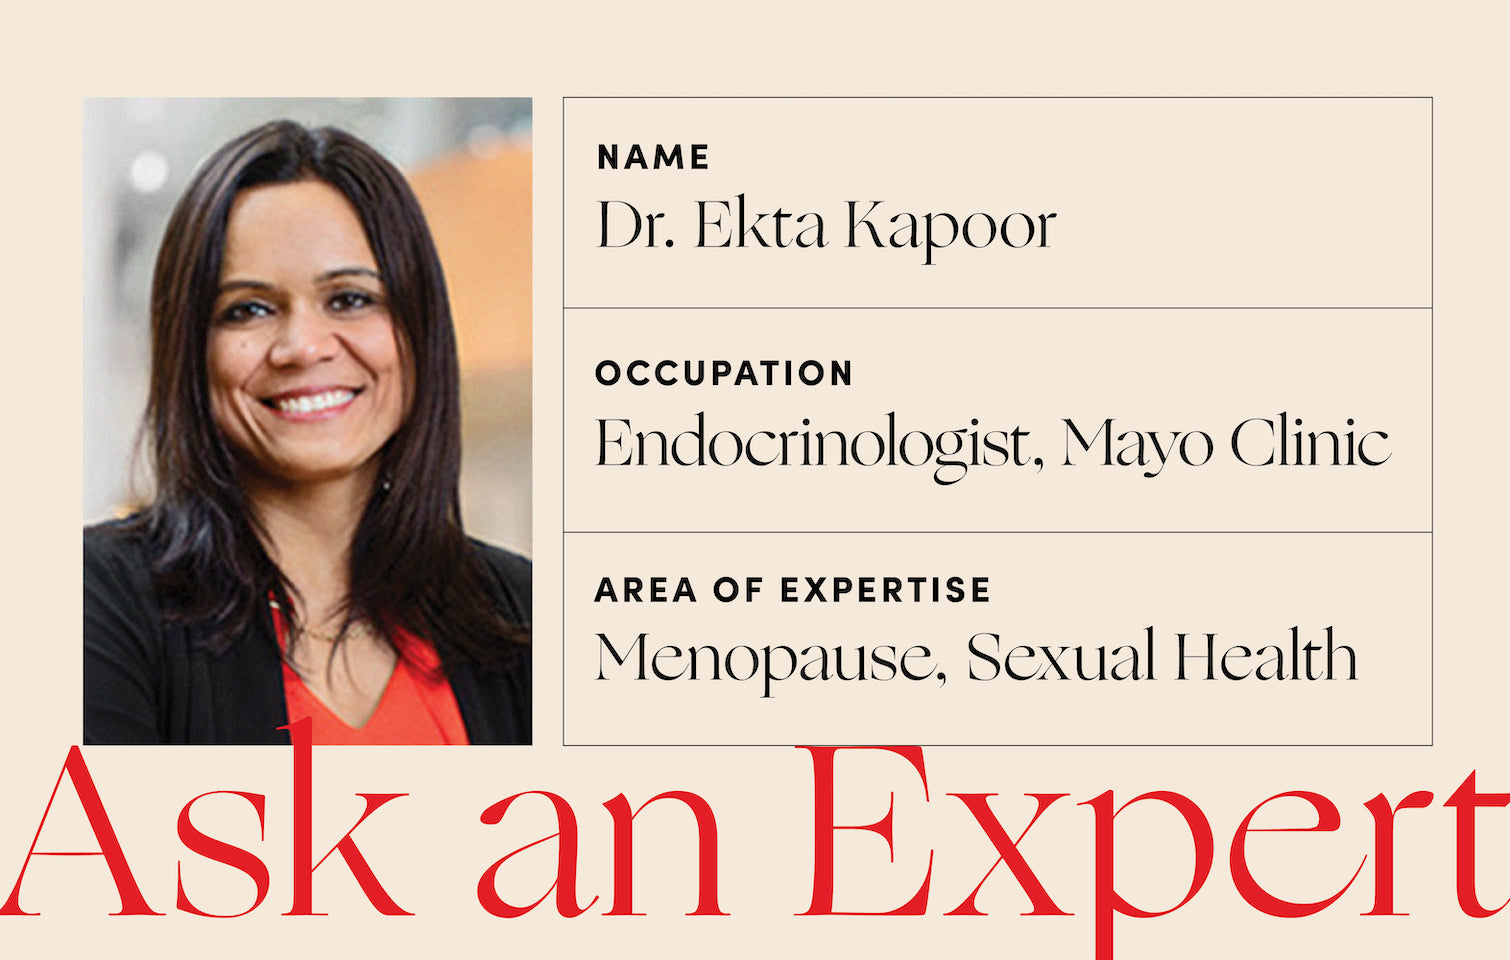 Mayo Clinic's Dr. Ekta Kapoor expert for Womaness